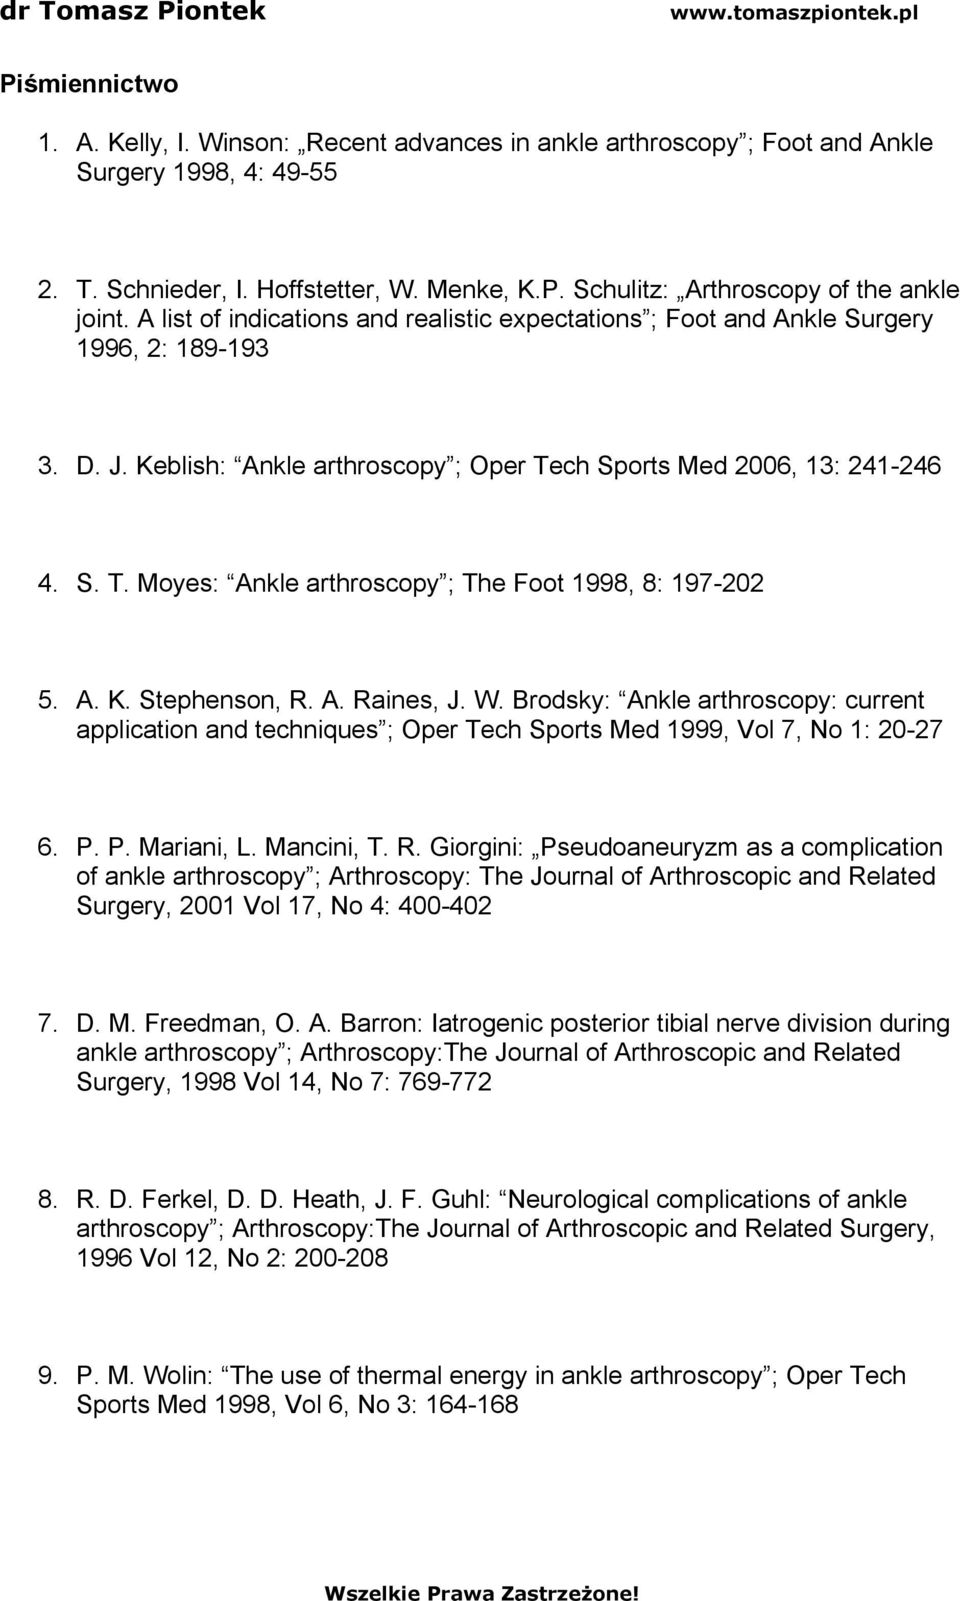 A. K. Stephenson, R. A. Raines, J. W. Brodsky: Ankle arthroscopy: current application and techniques ; Oper Tech Sports Med 1999, Vol 7, No 1: 20-27 6. P. P. Mariani, L. Mancini, T. R. Giorgini: Pseudoaneuryzm as a complication of ankle arthroscopy ; Arthroscopy: The Journal of Arthroscopic and Related Surgery, 2001 Vol 17, No 4: 400-402 7.